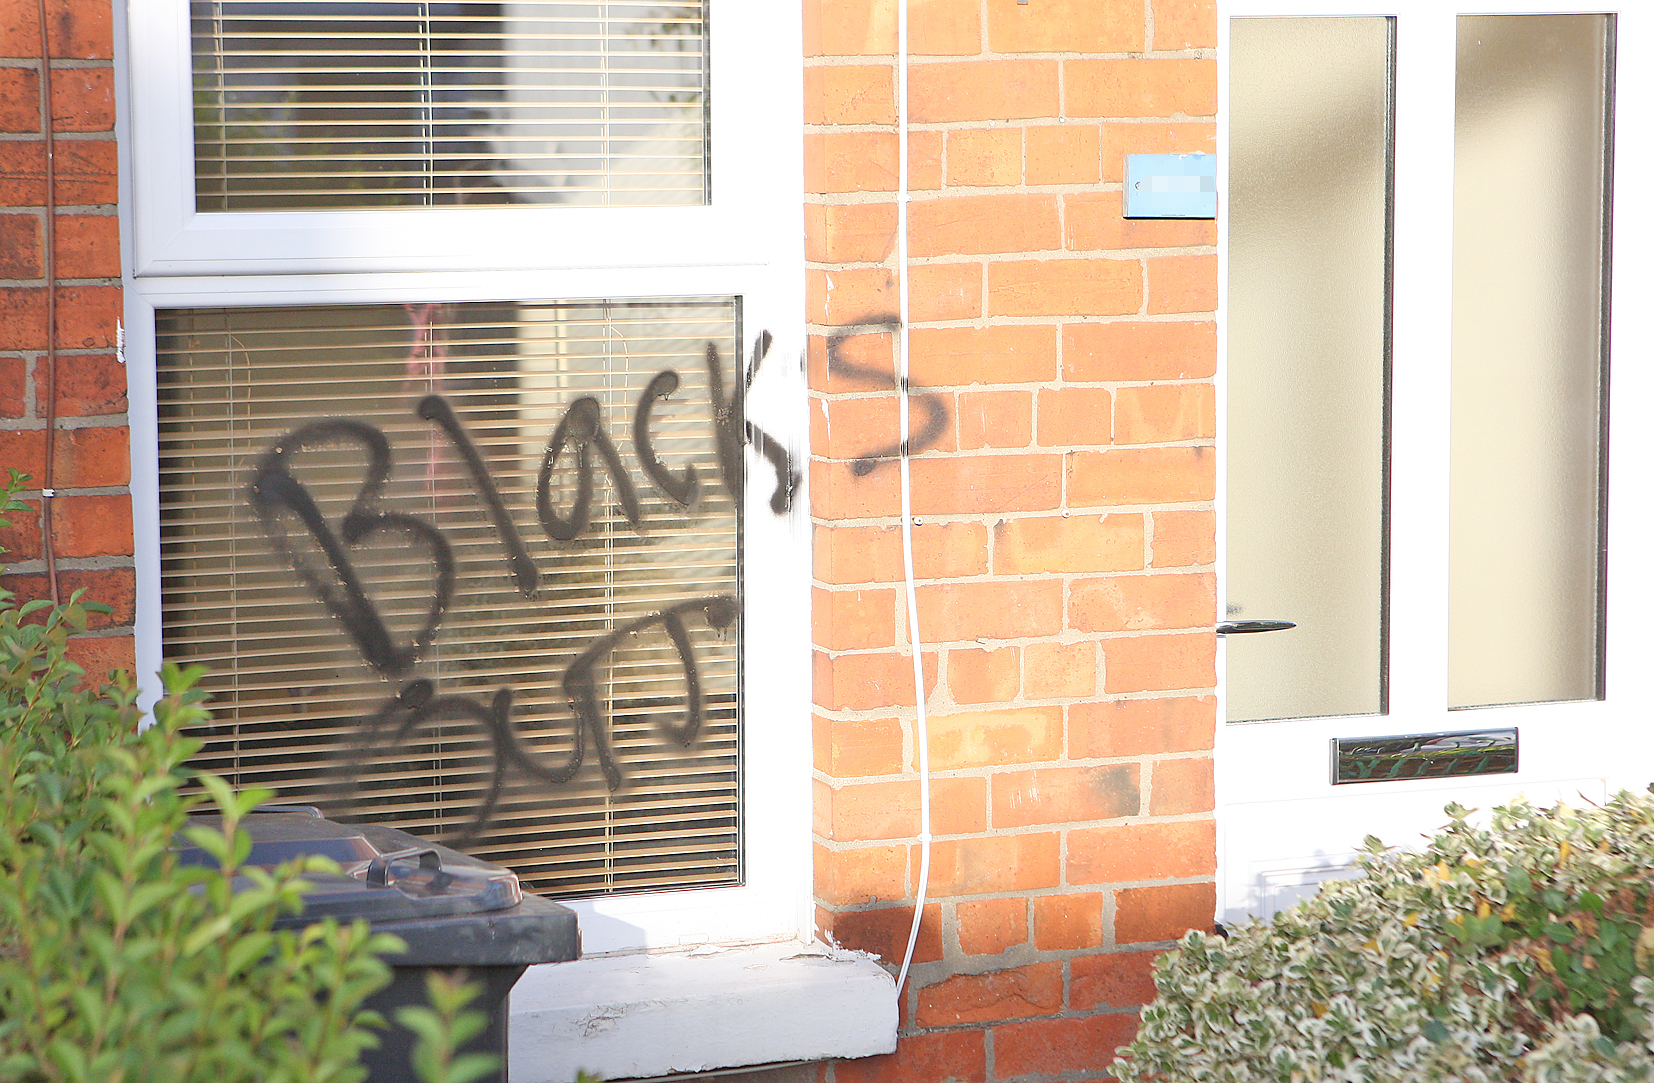 The graffiti daubed on the Stockman’s Lane property has been removed by Council cleansing staff